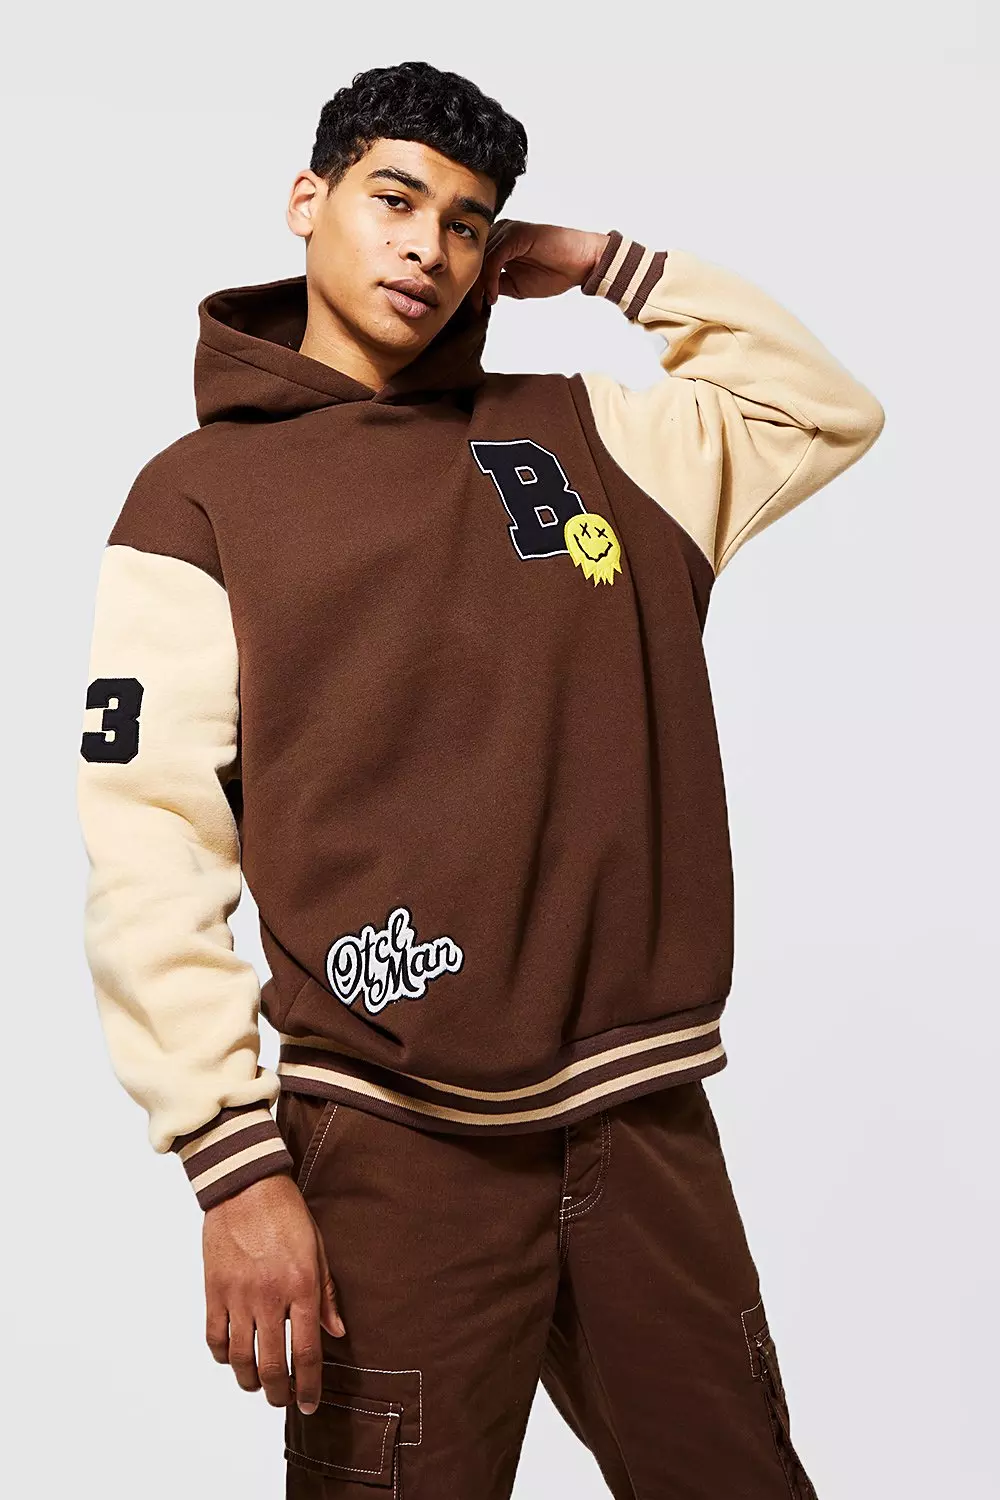 The latest collection of brown zip up hoodies